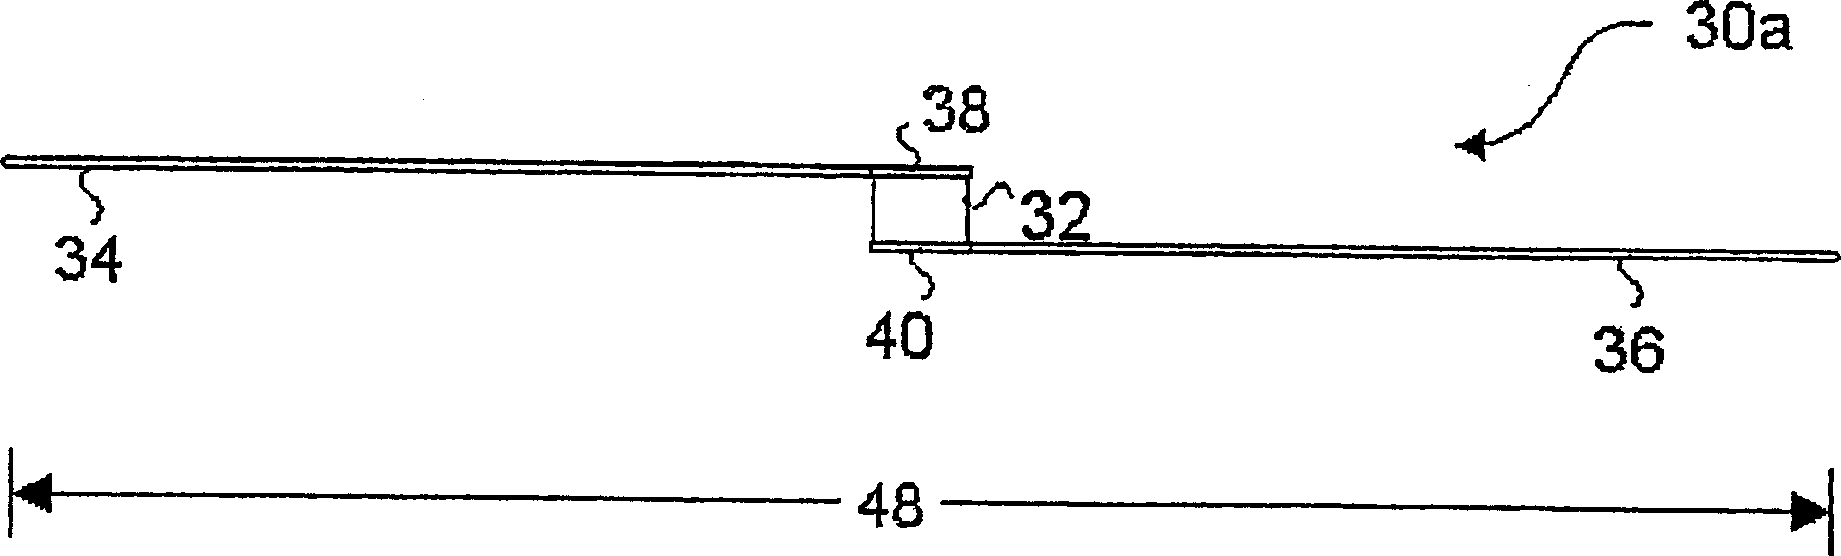 Tire electronics assembly having a multi-frequency antenna